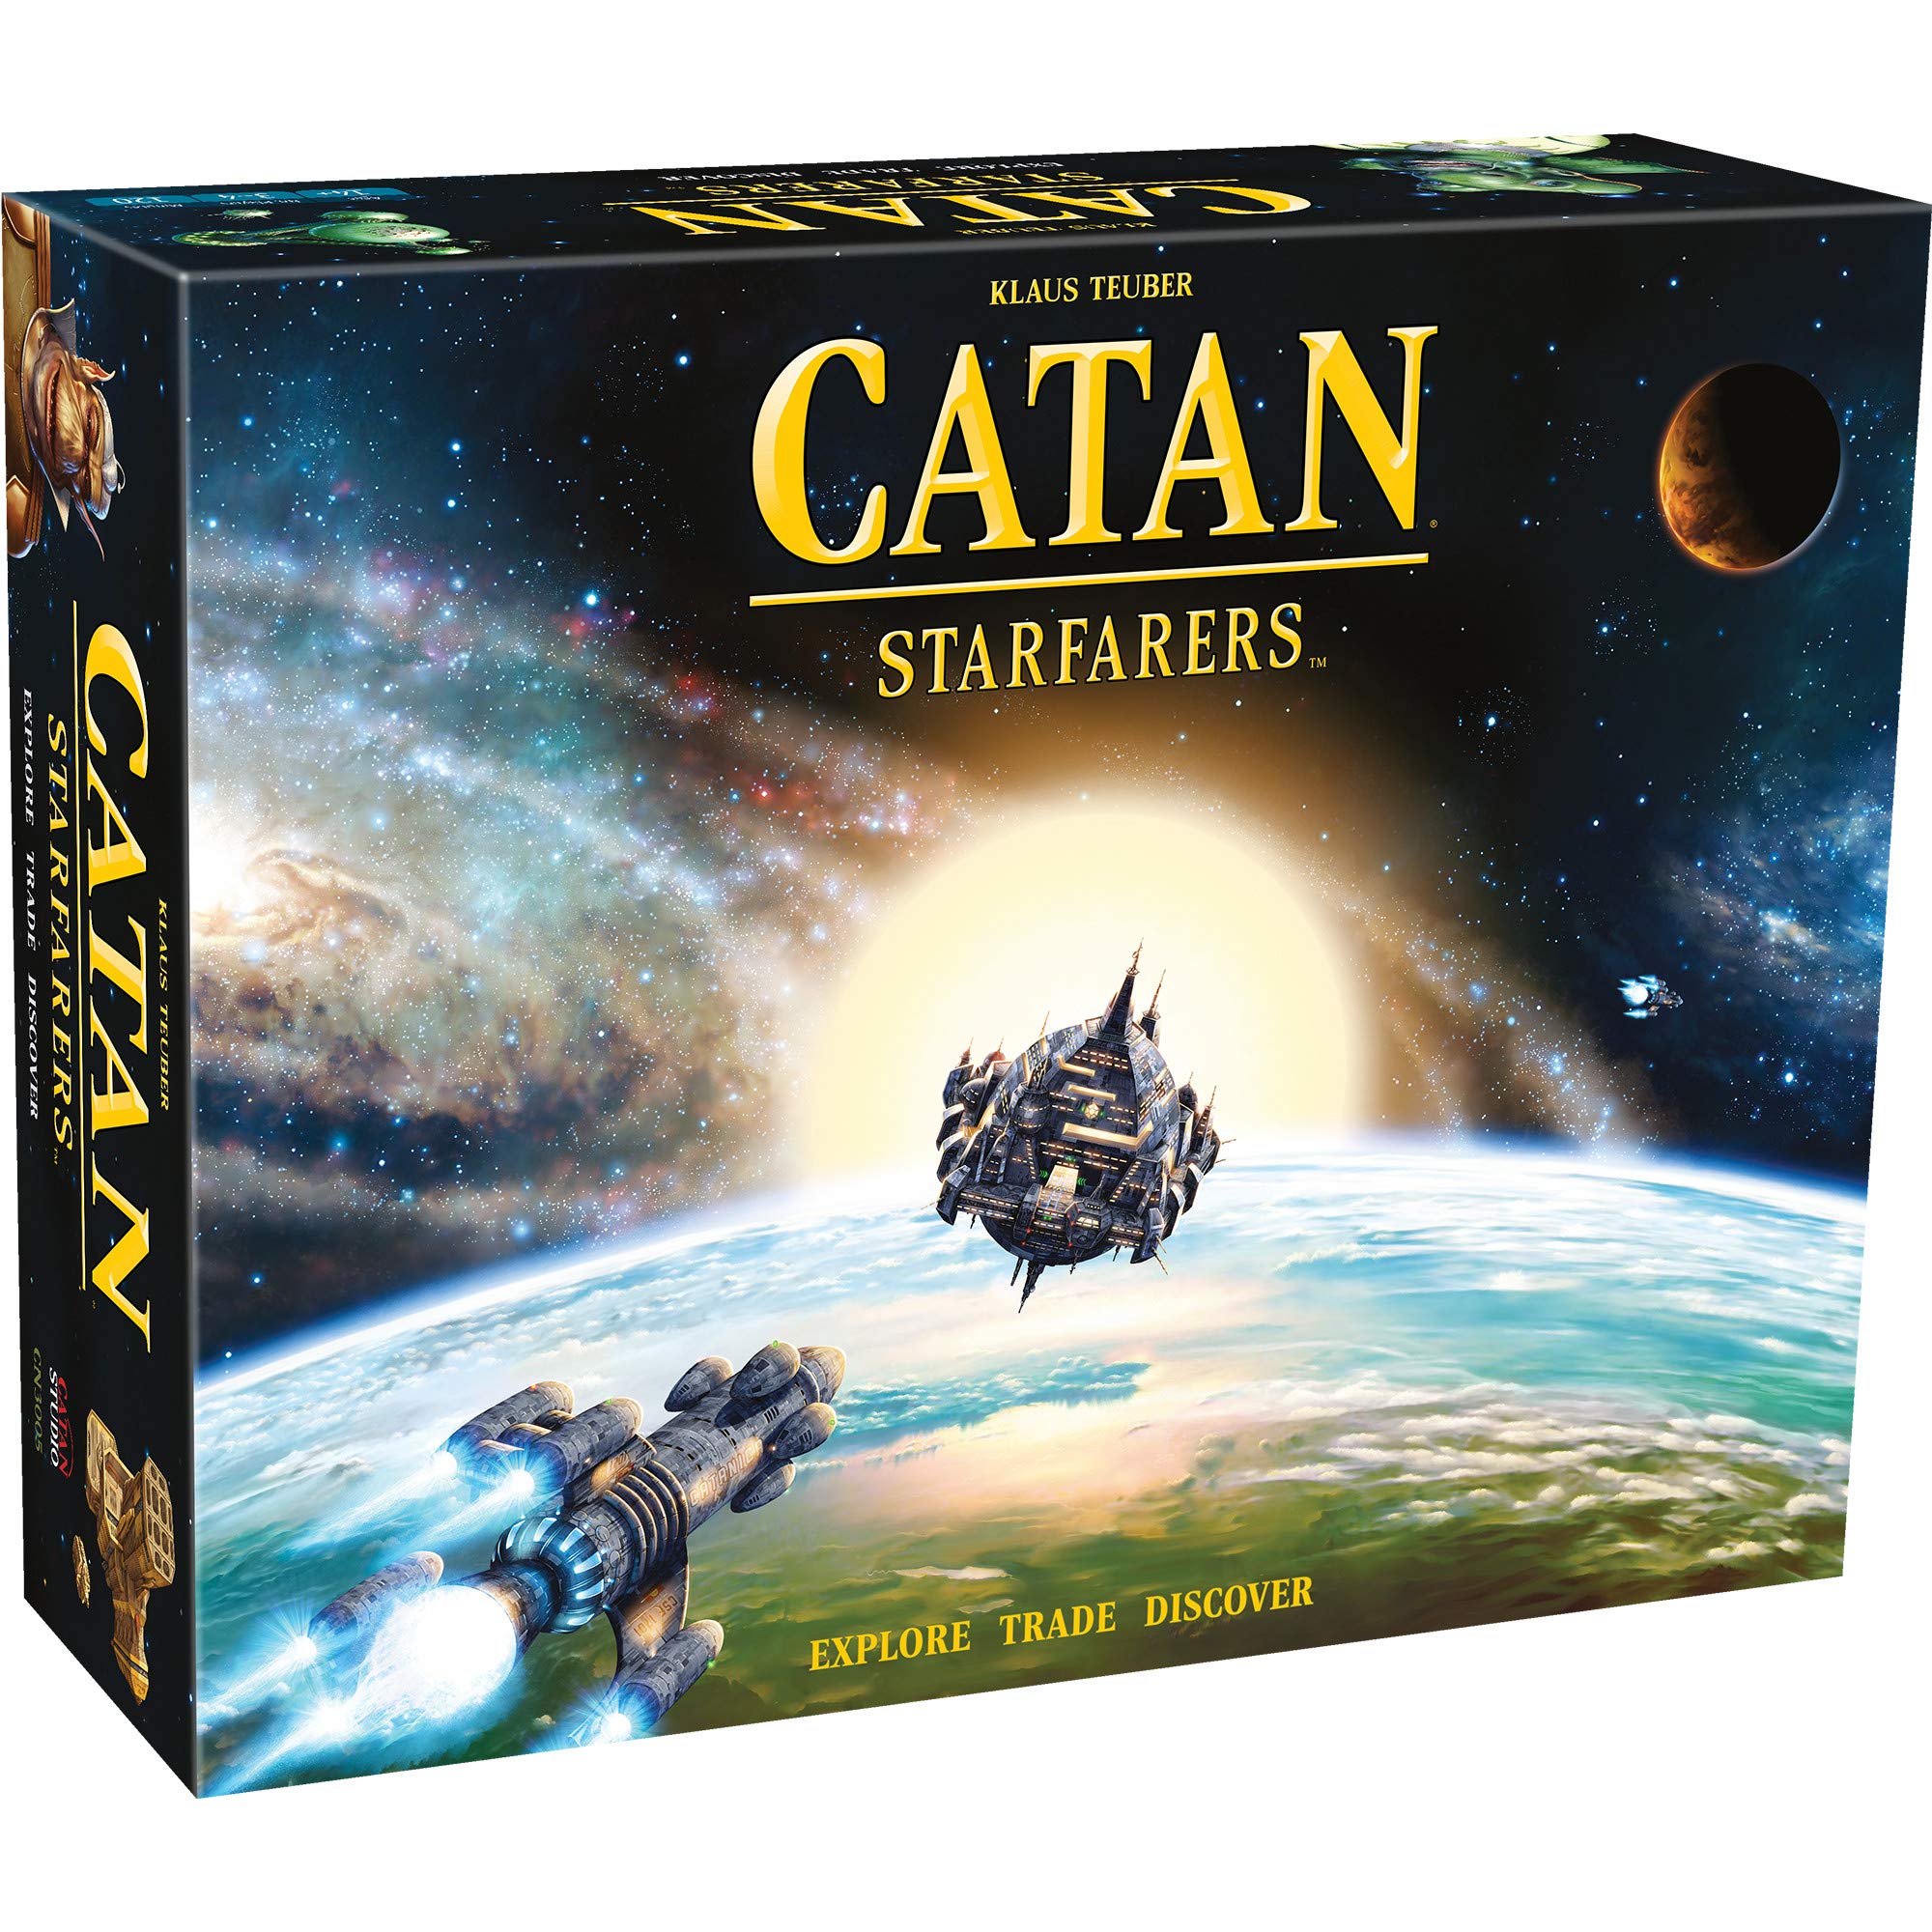 CATAN Starfarers Board Game 2nd Ed. (Base Game) | Family Board Game for Adults and Kids | Adventure Board Game | Ages 14+ | 3 to 4 players | Average Playtime 120 minutes | Made by Catan Studio